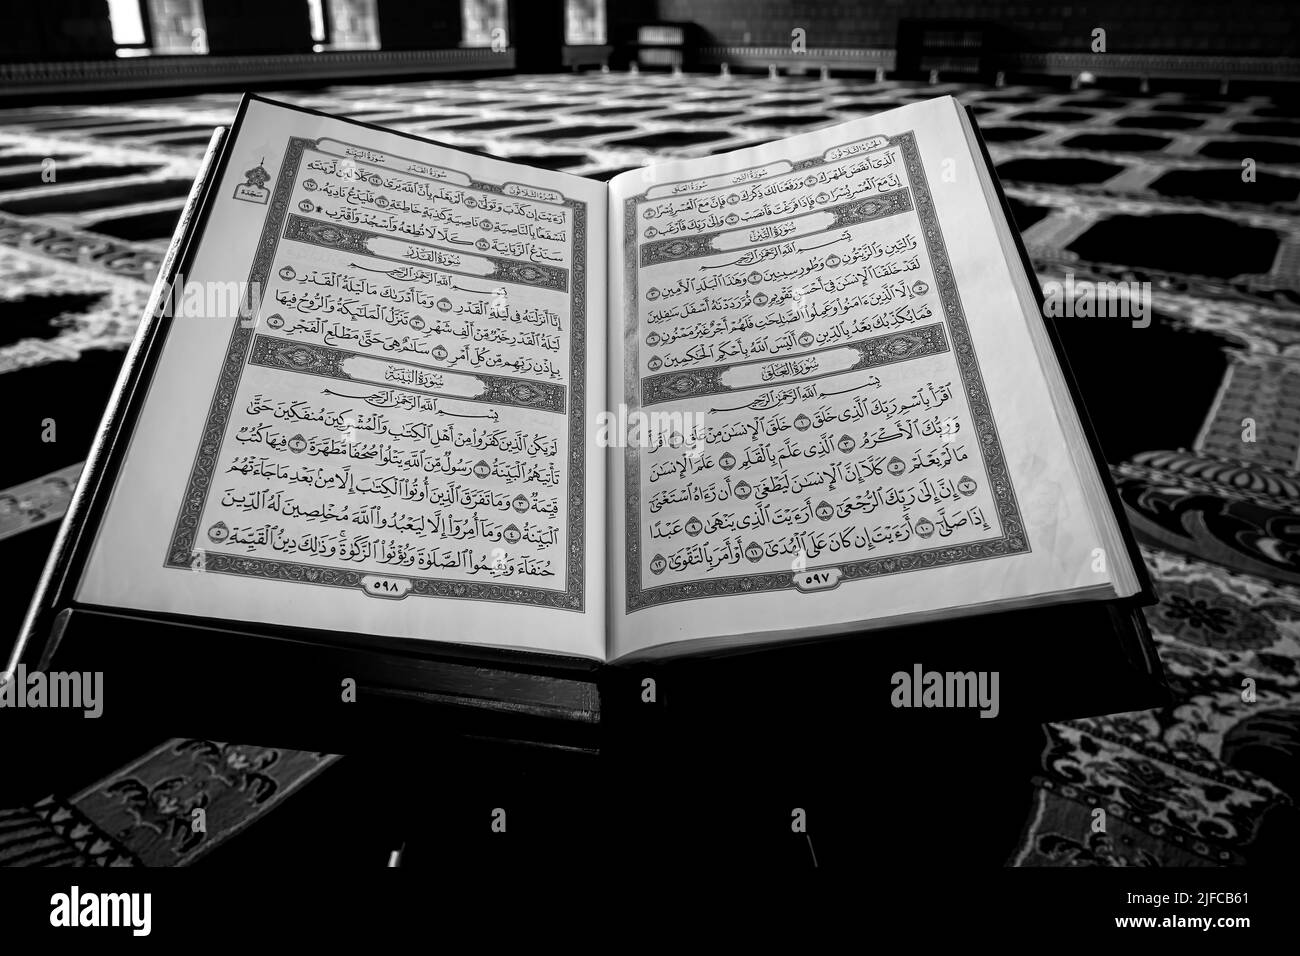 The Holy Quran inside the Mosque black and white version. Clicked in Dammam Masjid Saudi Arabia Stock Photo